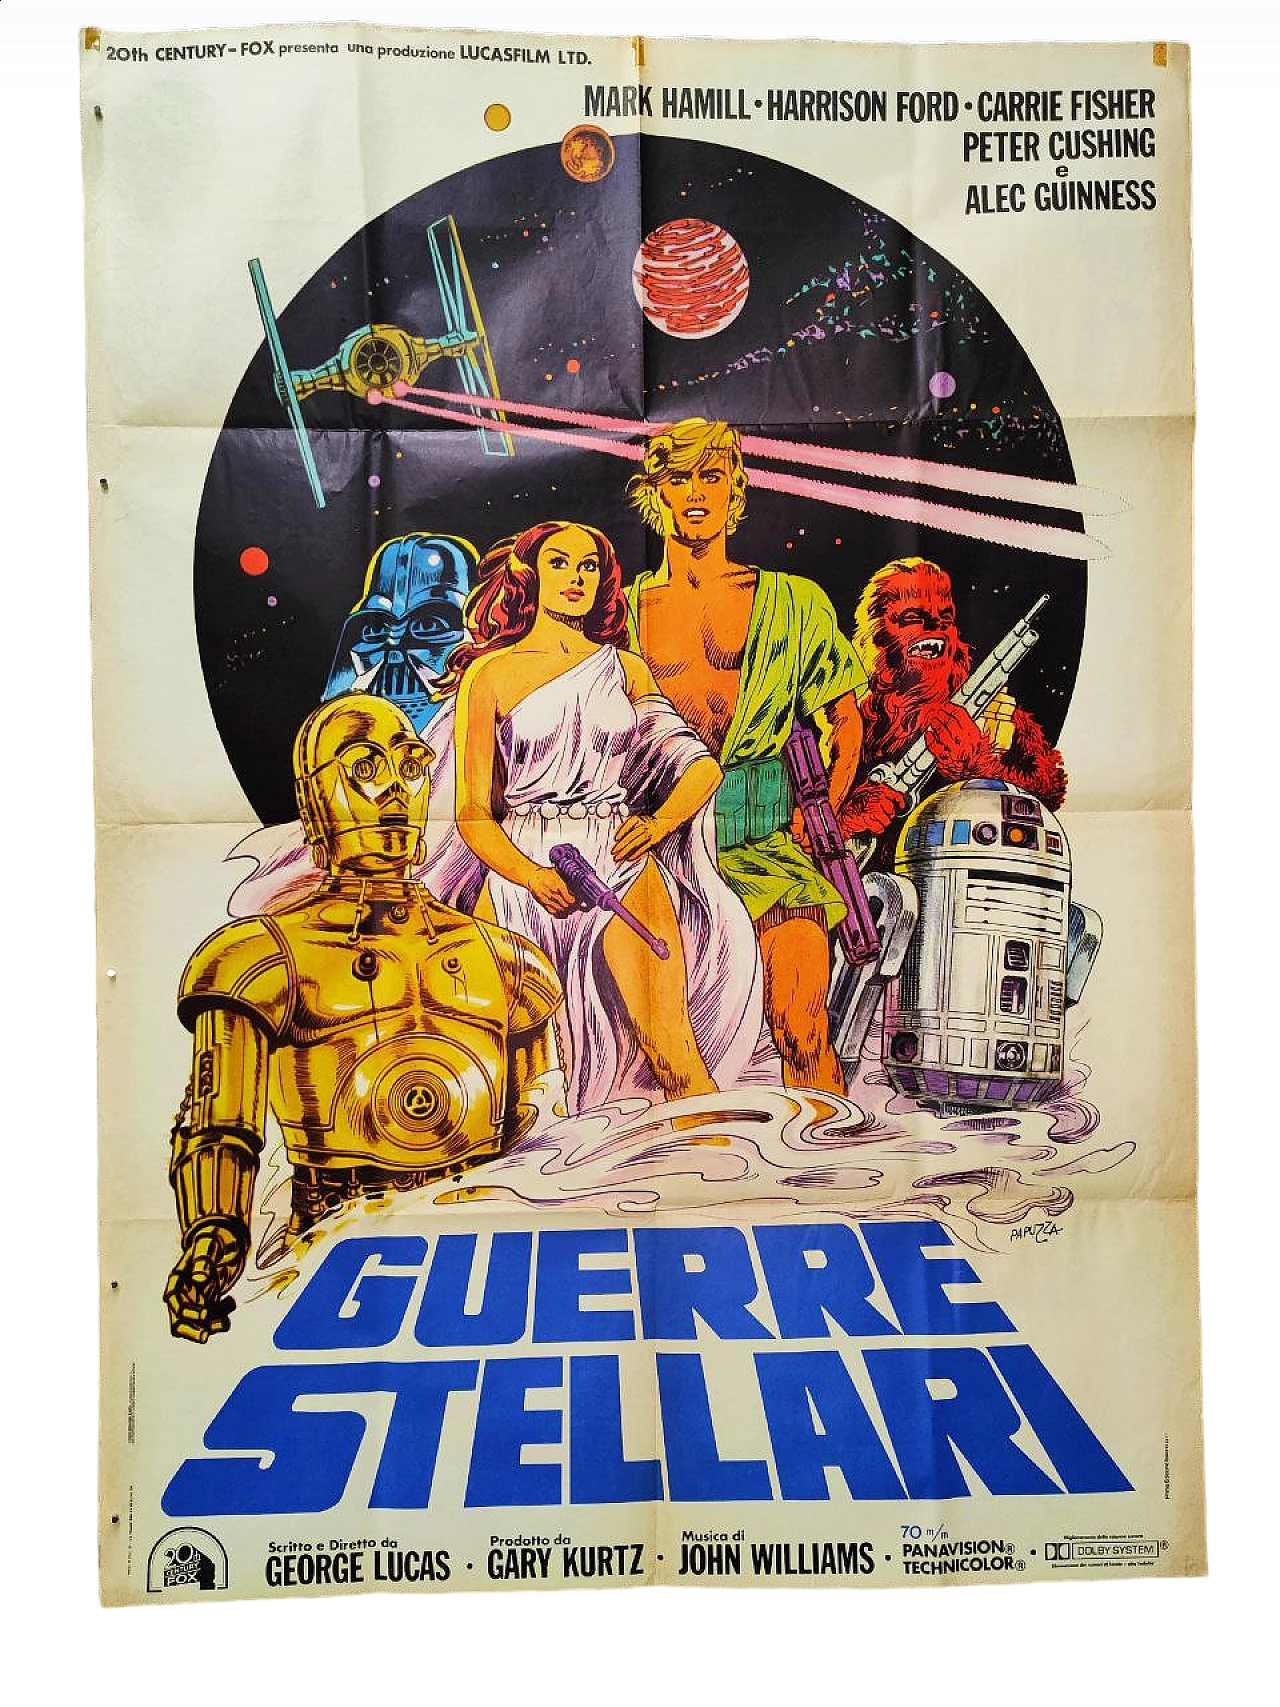 Movie poster for Star Wars, 1977 4